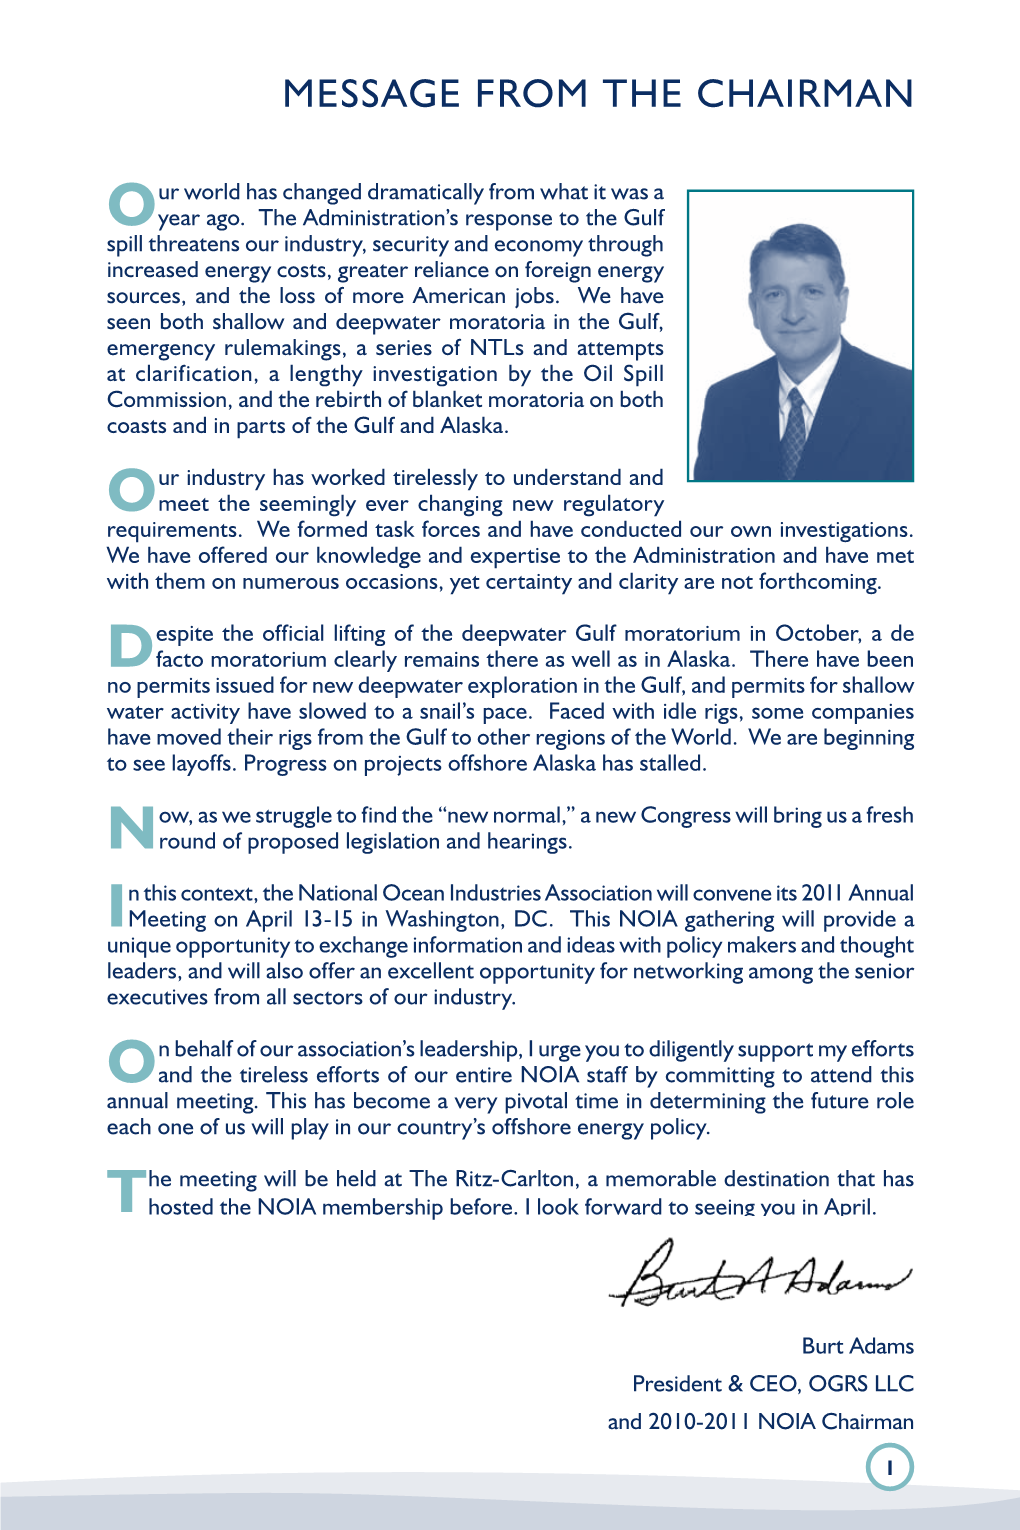 Message from the Chairman